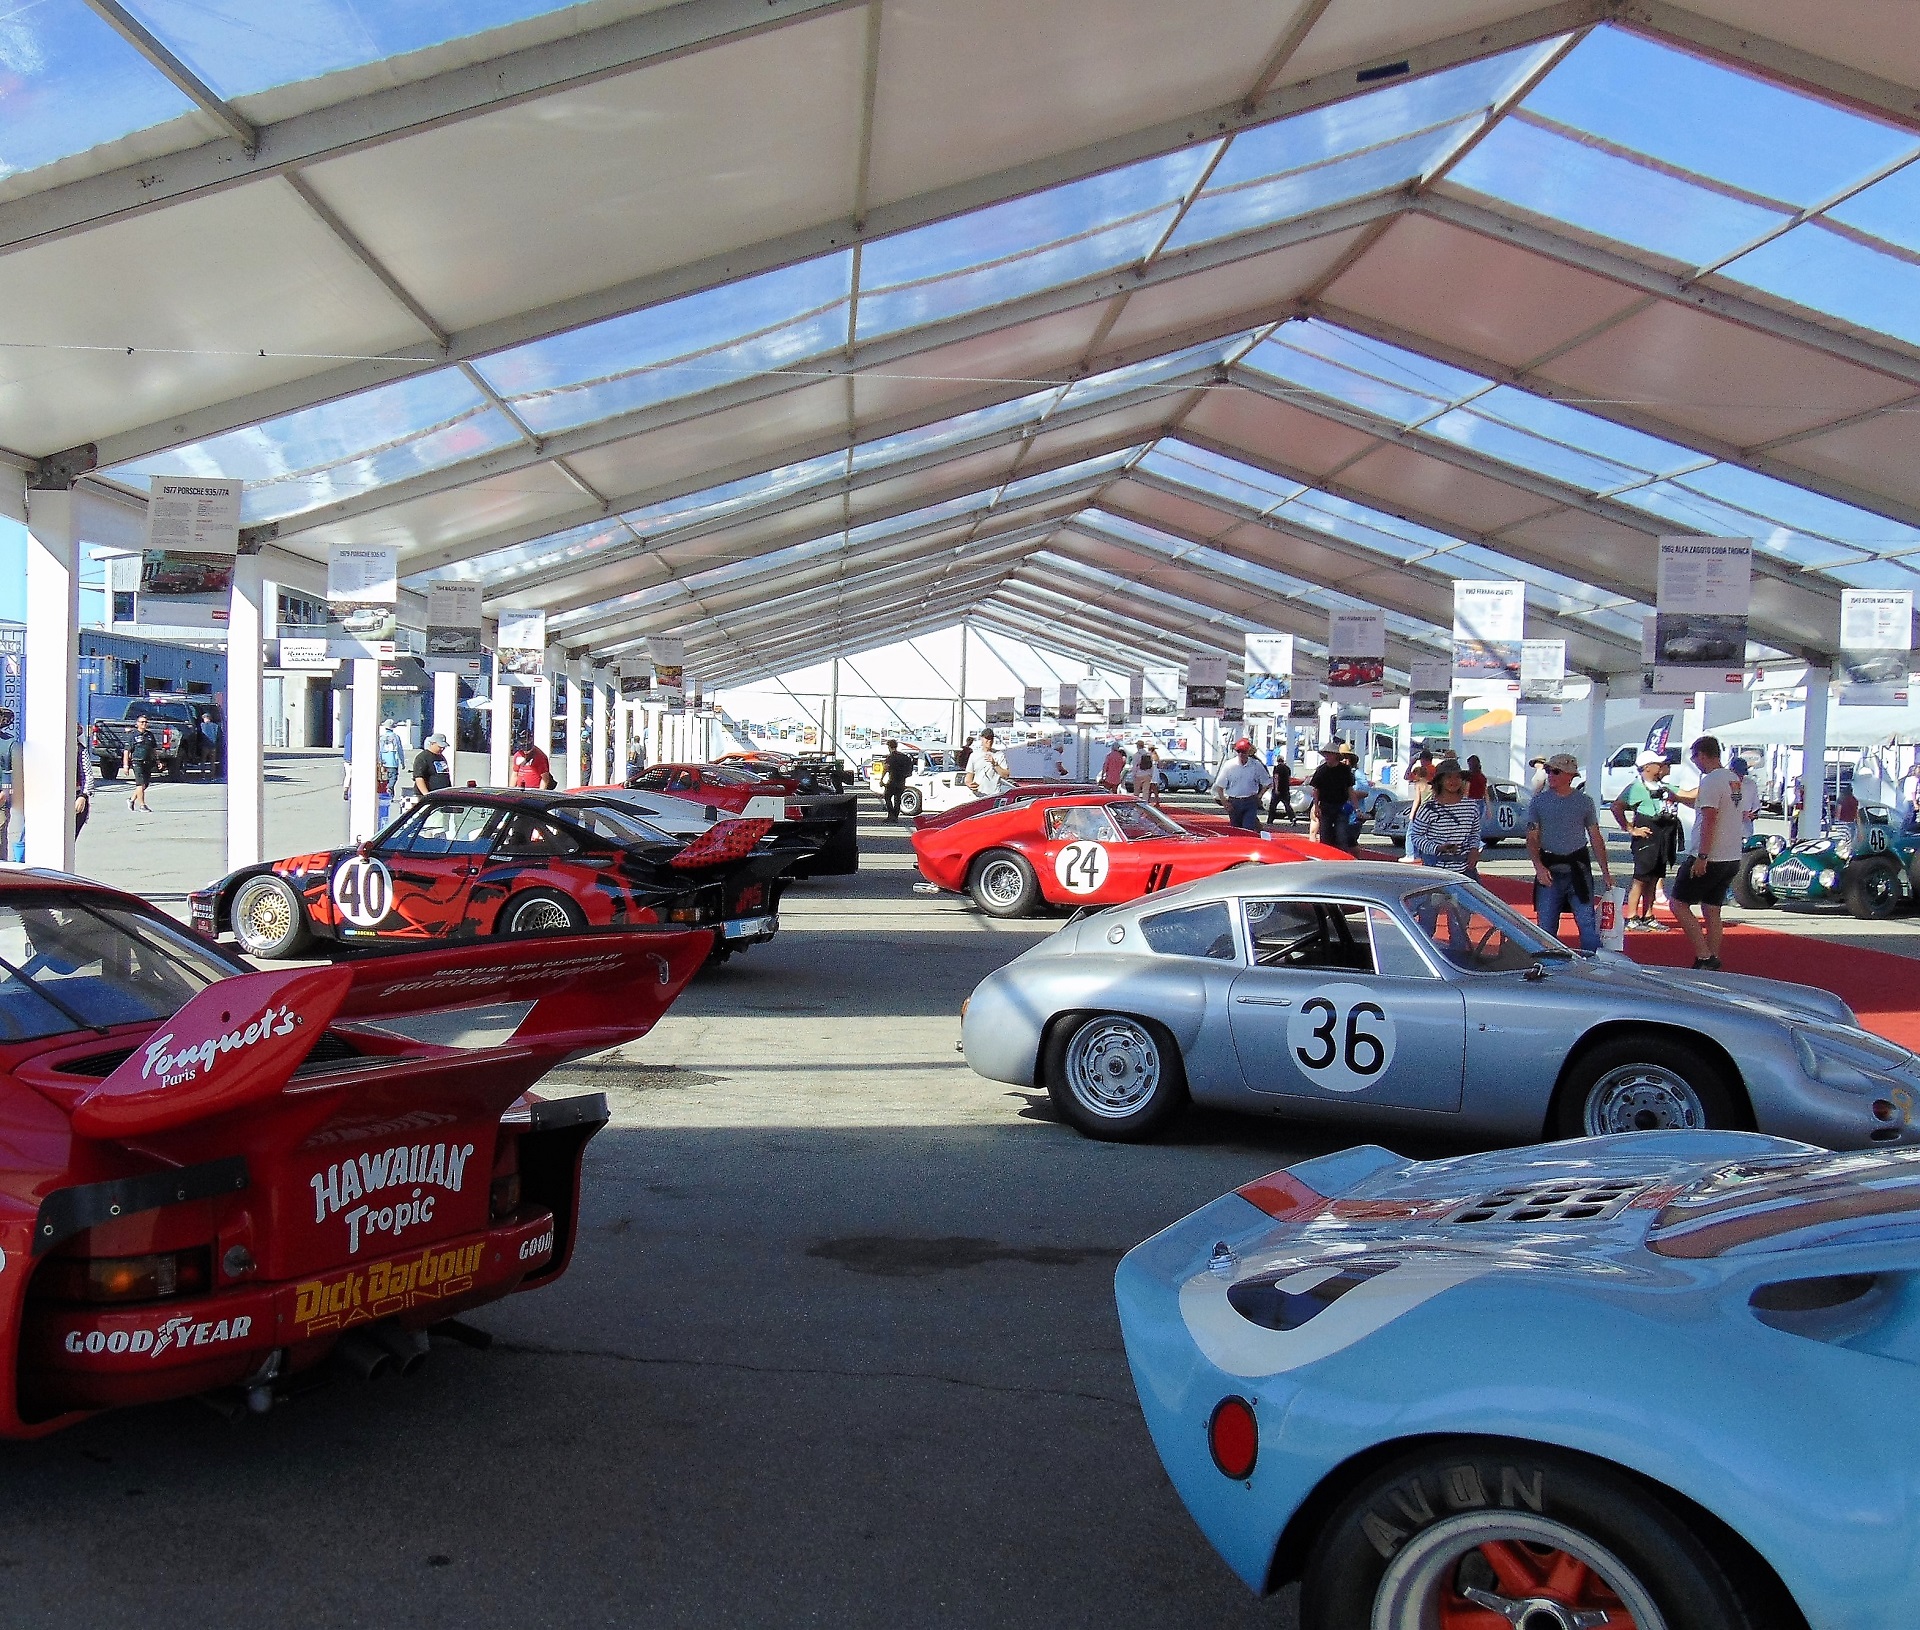 Vintage racecars parked under the paddock tent 